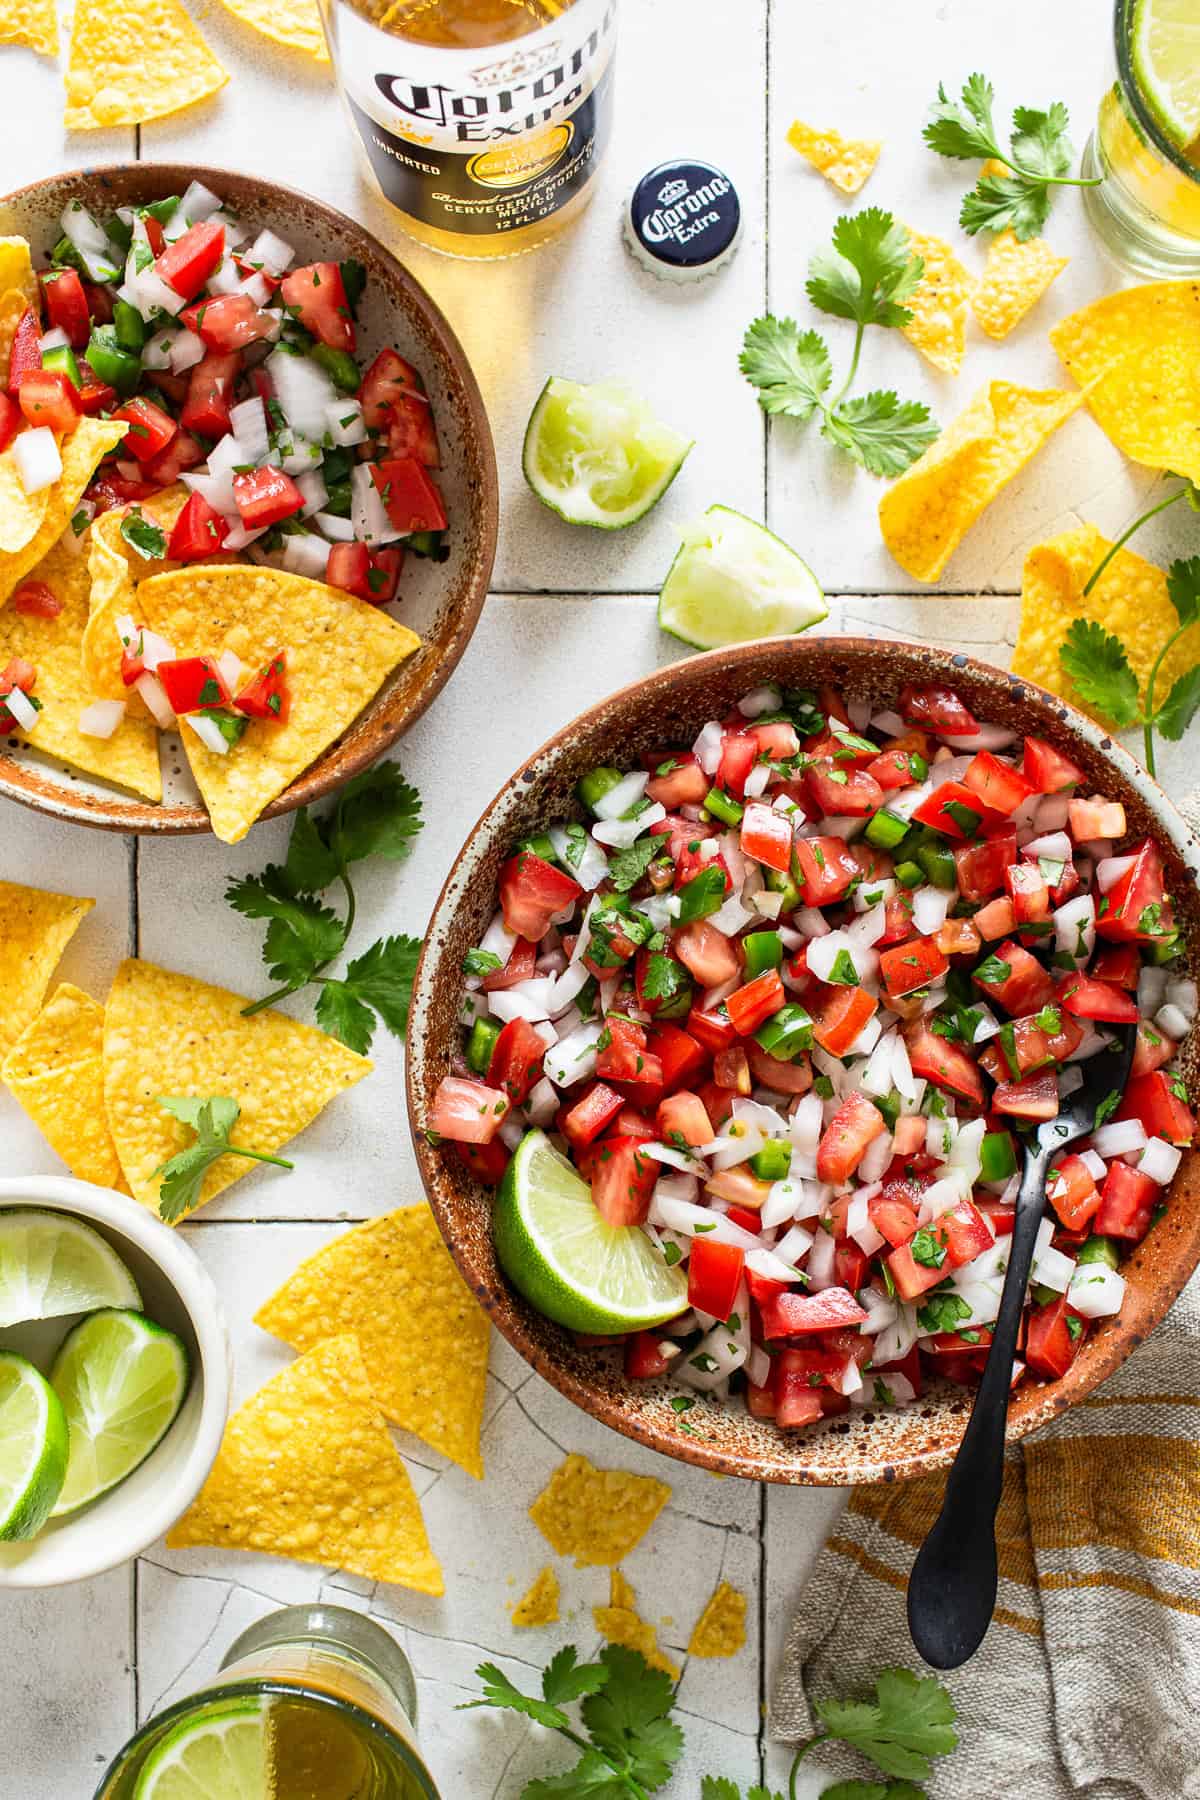 Pico de gallo served with tortilla chips and limes